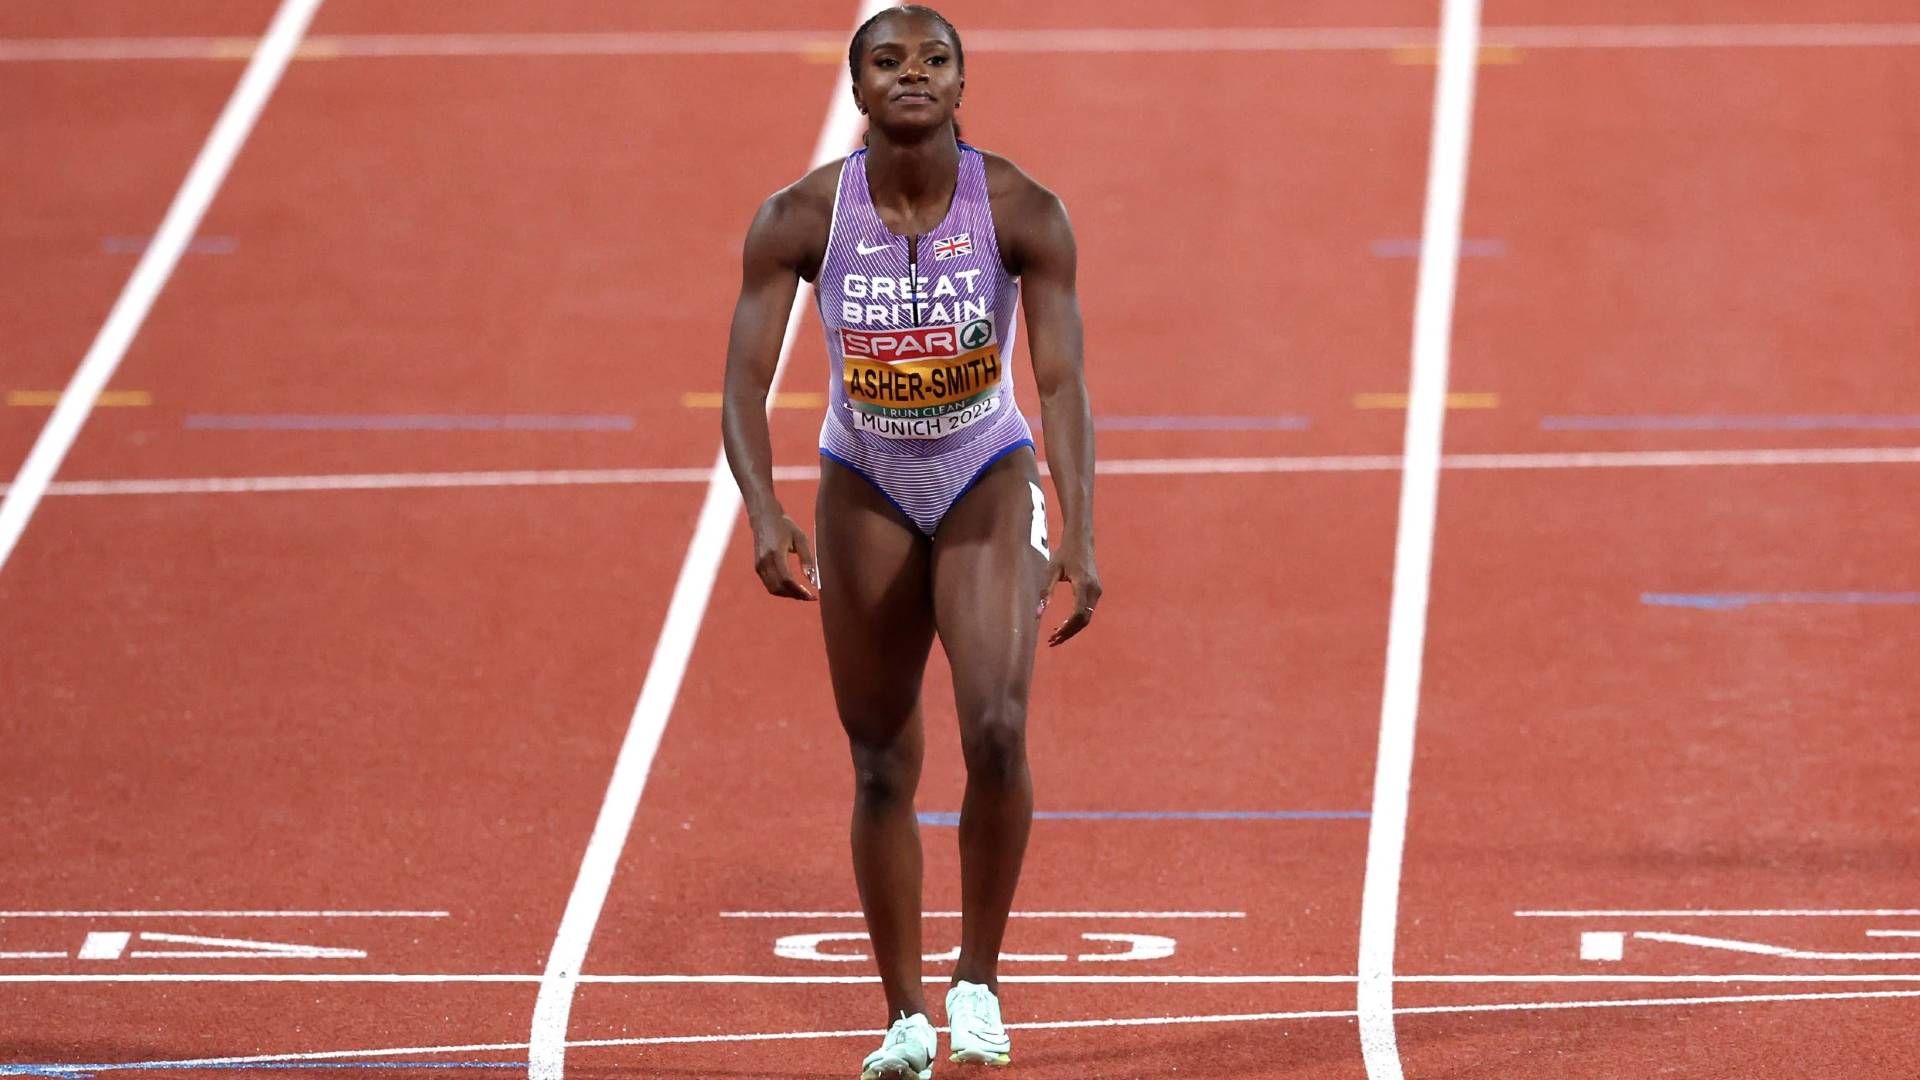 Dina Asher-Smith will be competing at the Birmingham World Indoor Tour Final 2023 (Credits - European Athletics)